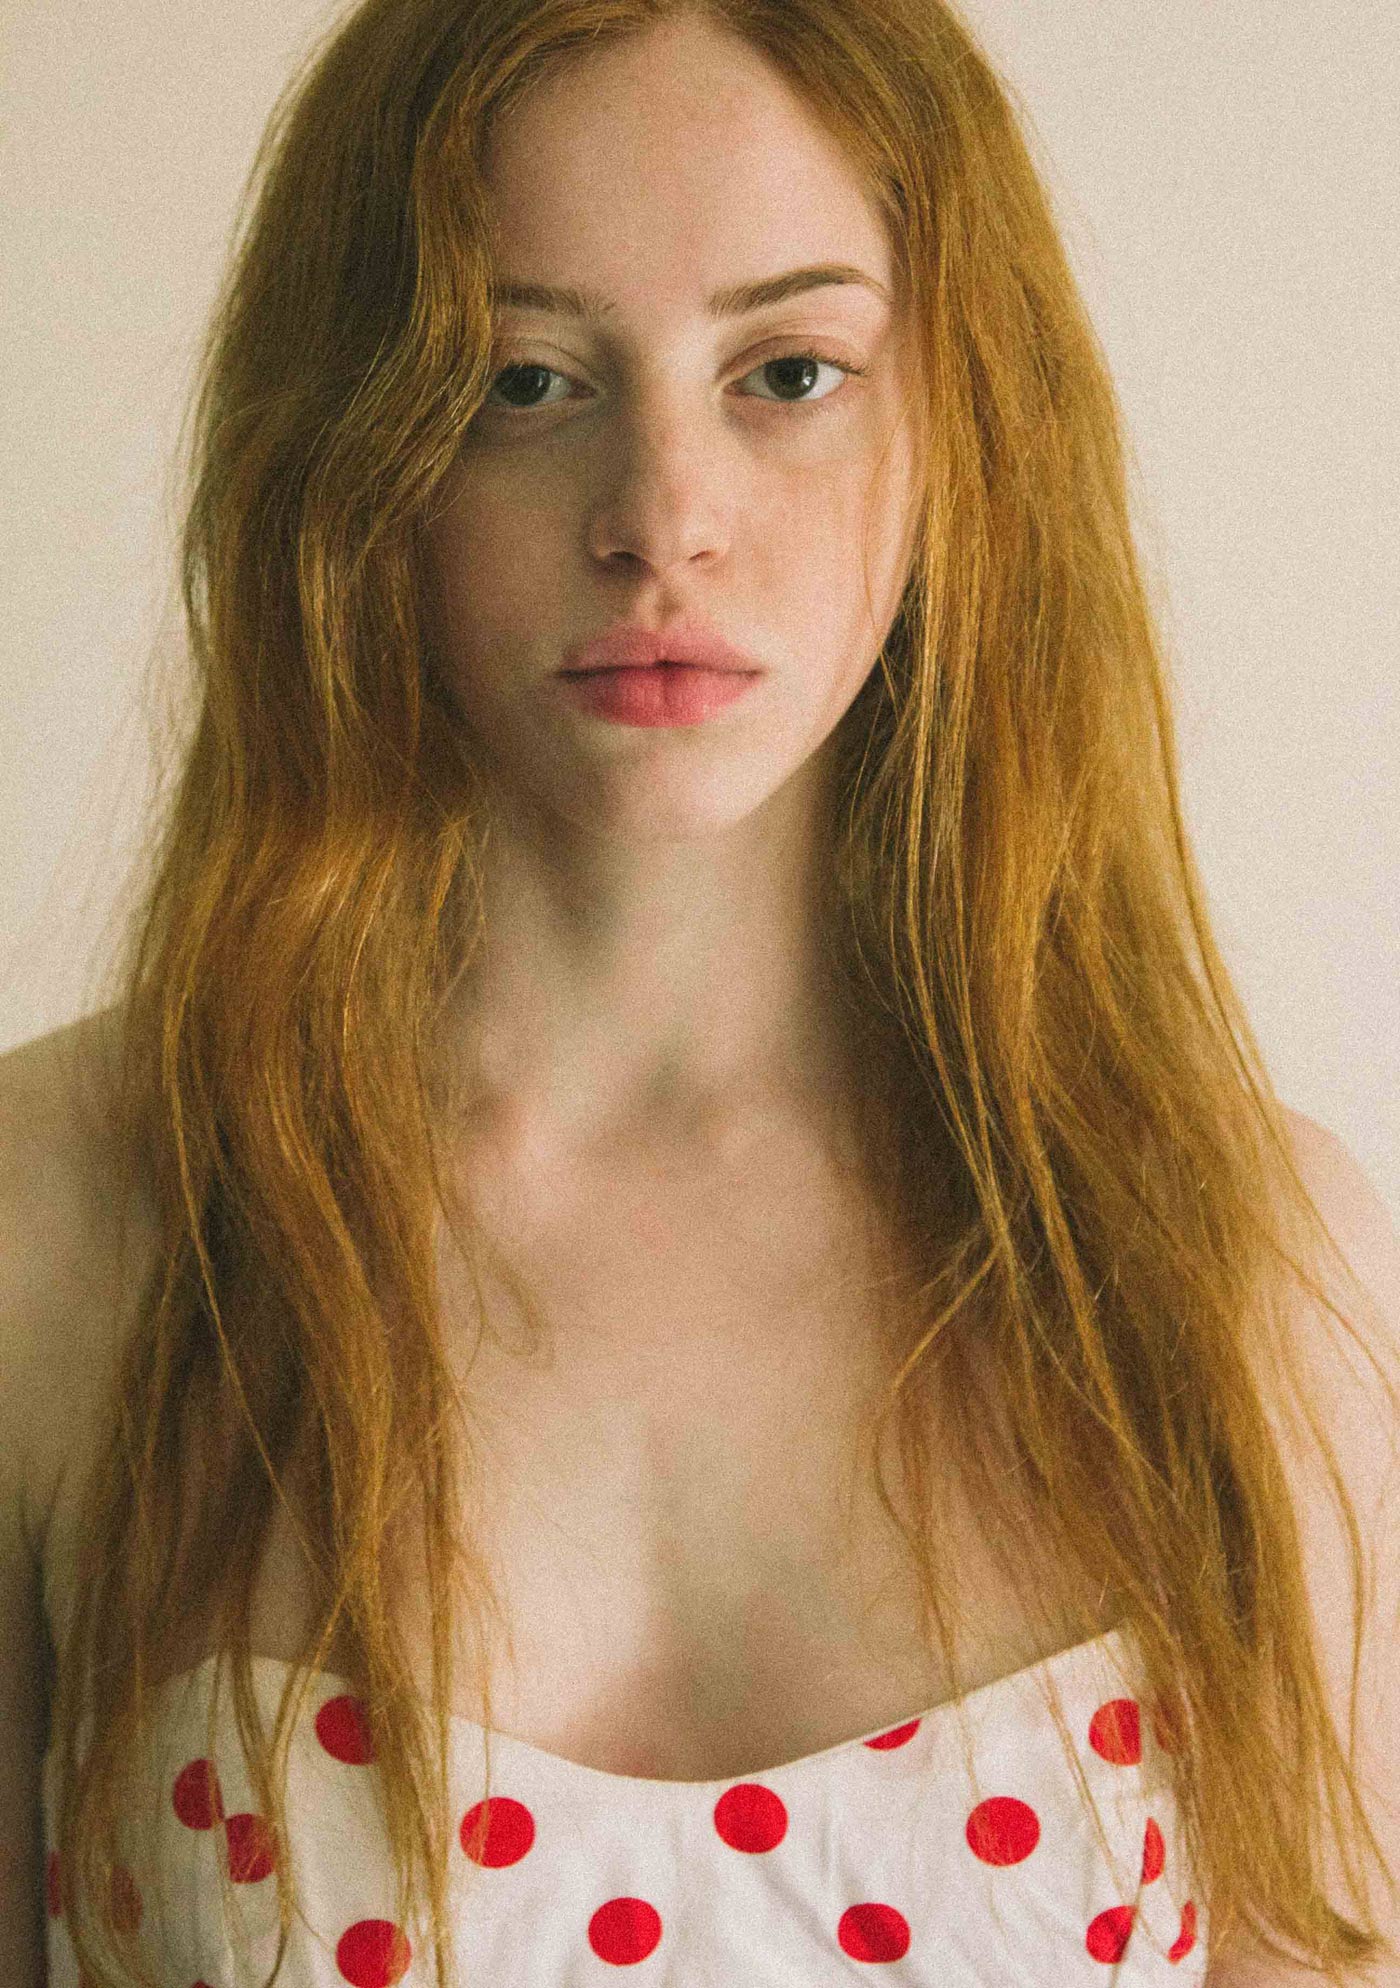 5 minutes with a model - Get to Know Lily Inge Newmark 